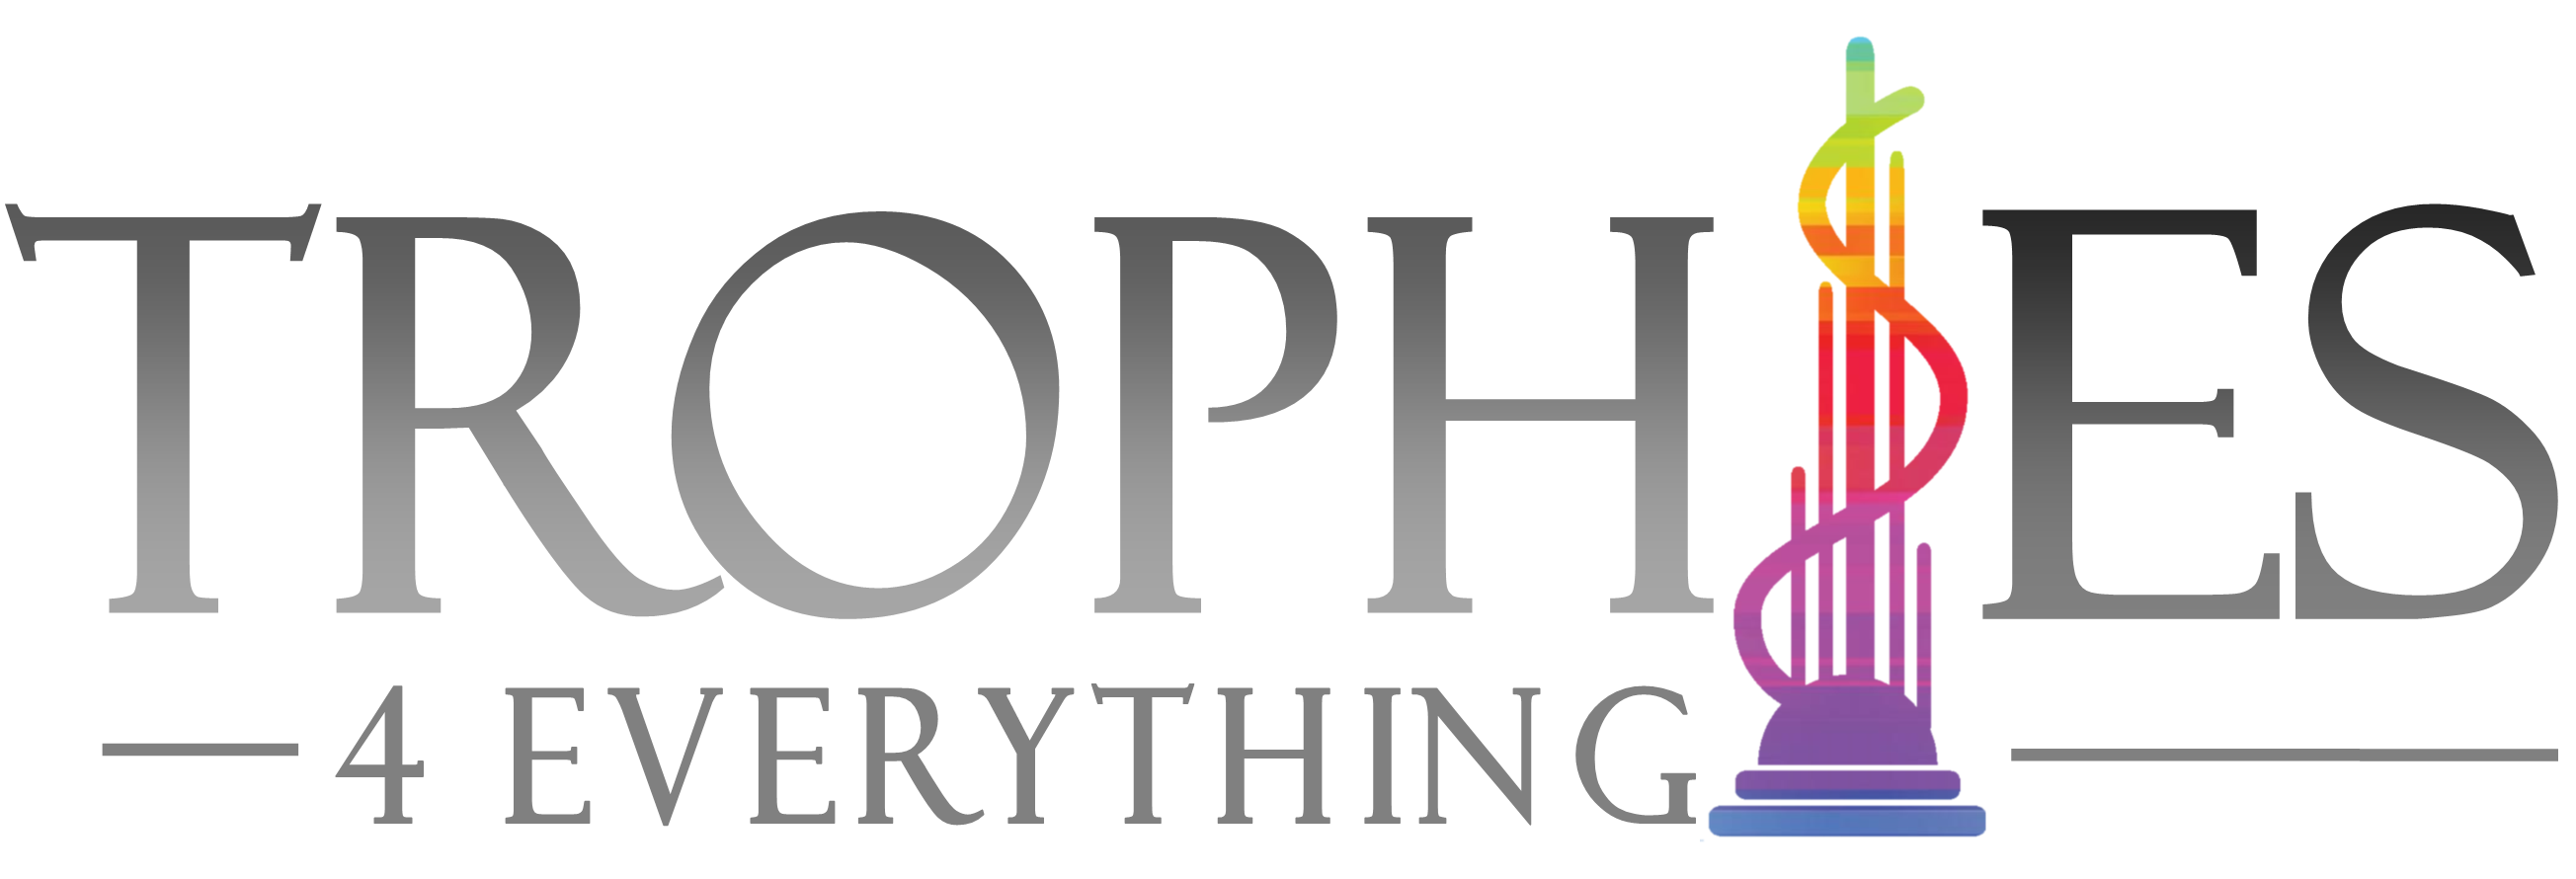 Trophies 4 Everything Logo by WA Designs